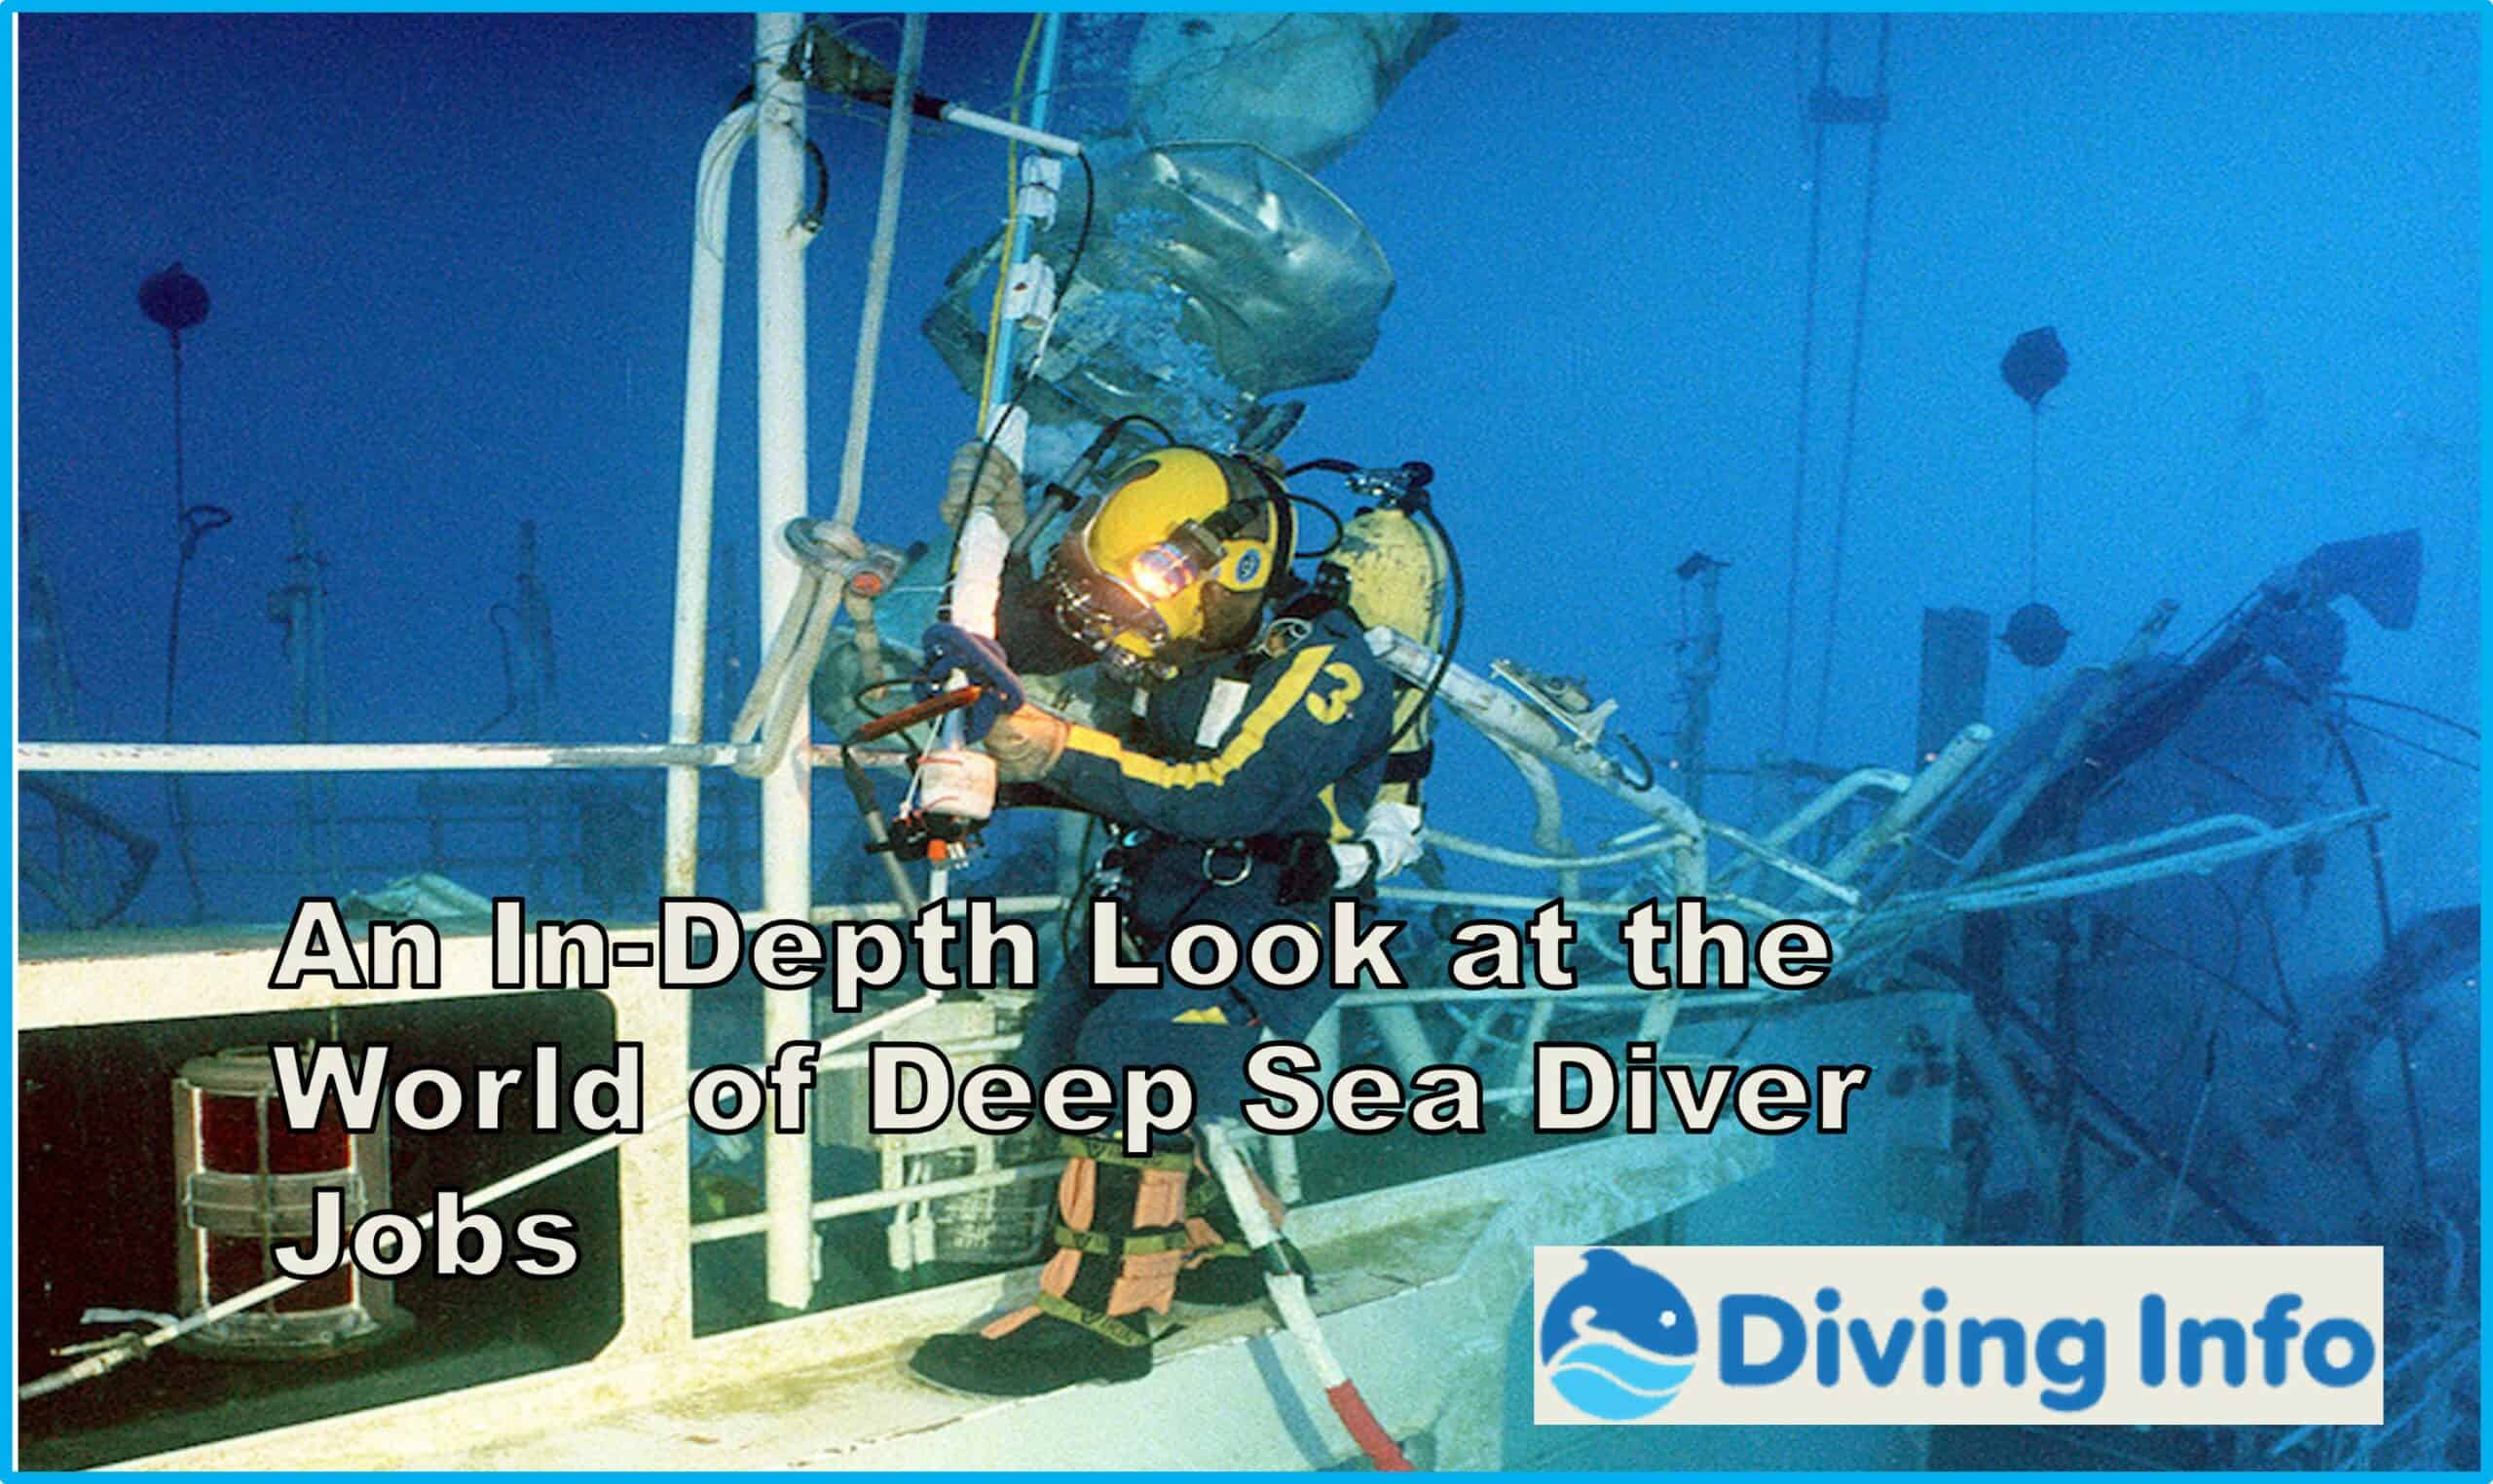 An In-Depth Look at the World of Deep Sea Diver Jobs